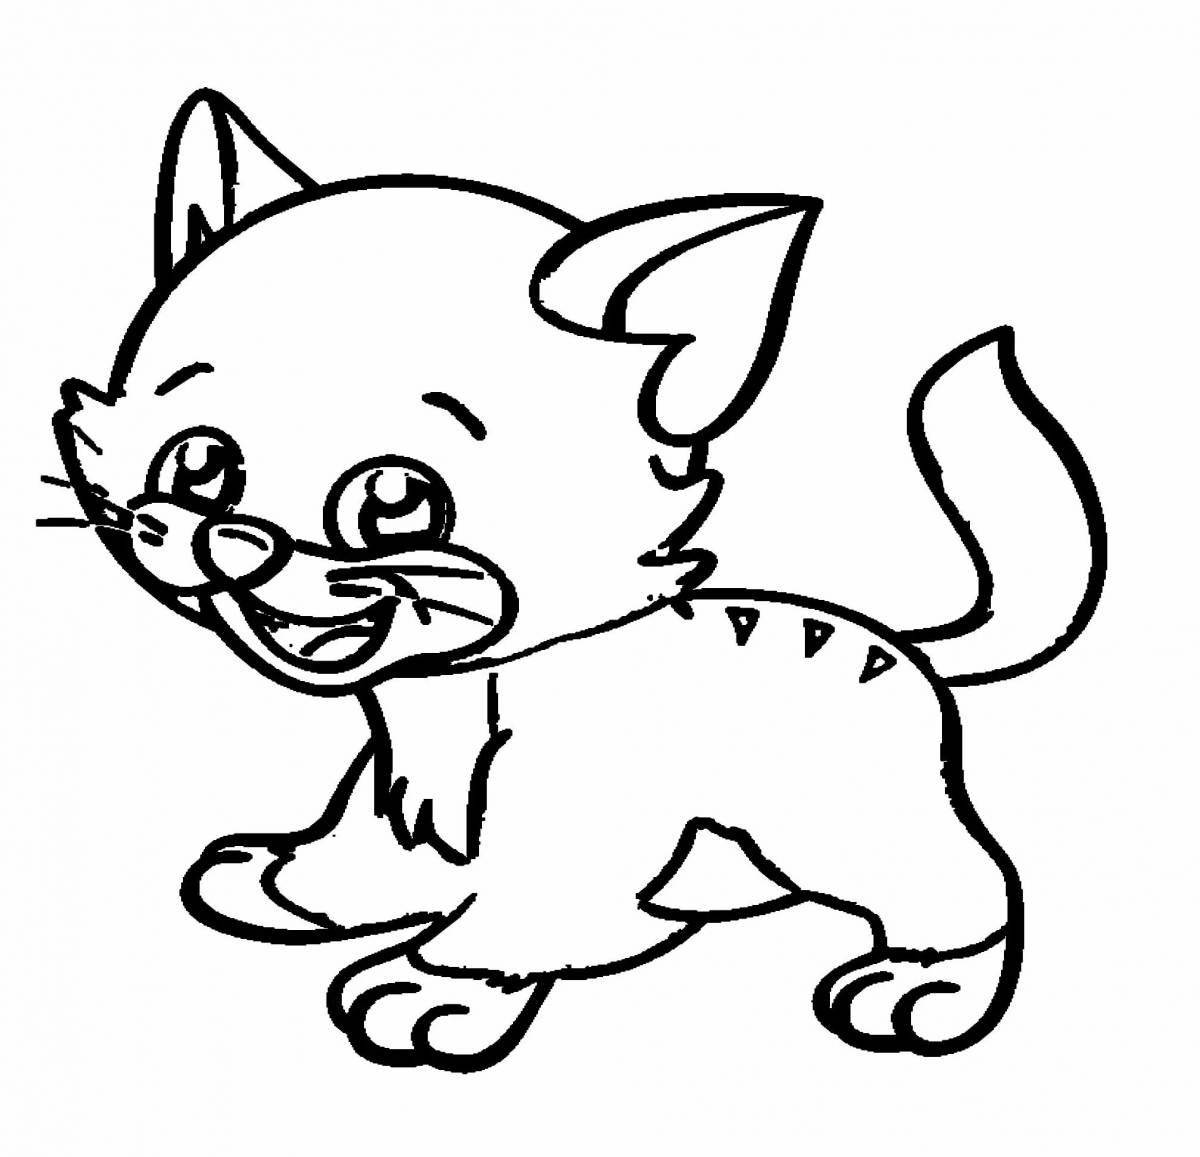 Witty cat and dog coloring pages for kids